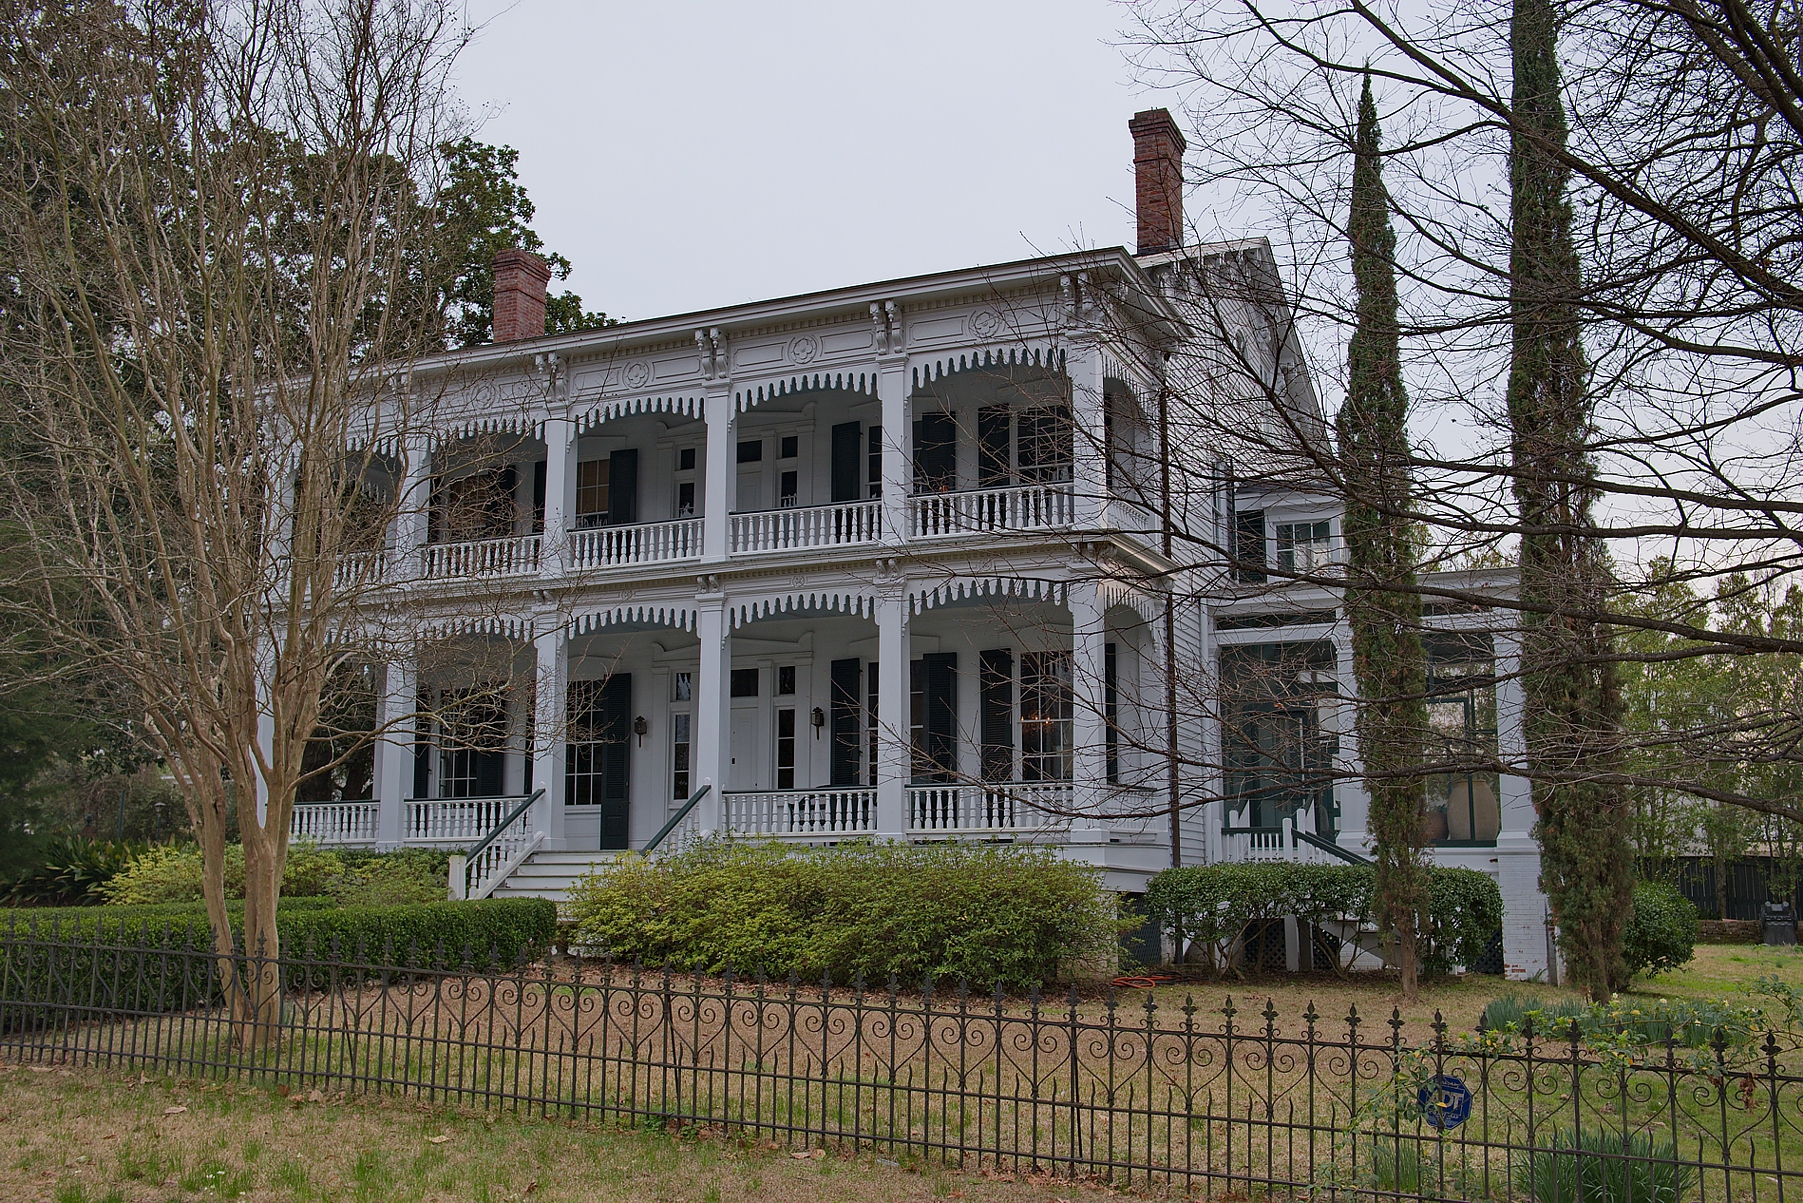  One of several houses in the lower part of old Yazoo City 